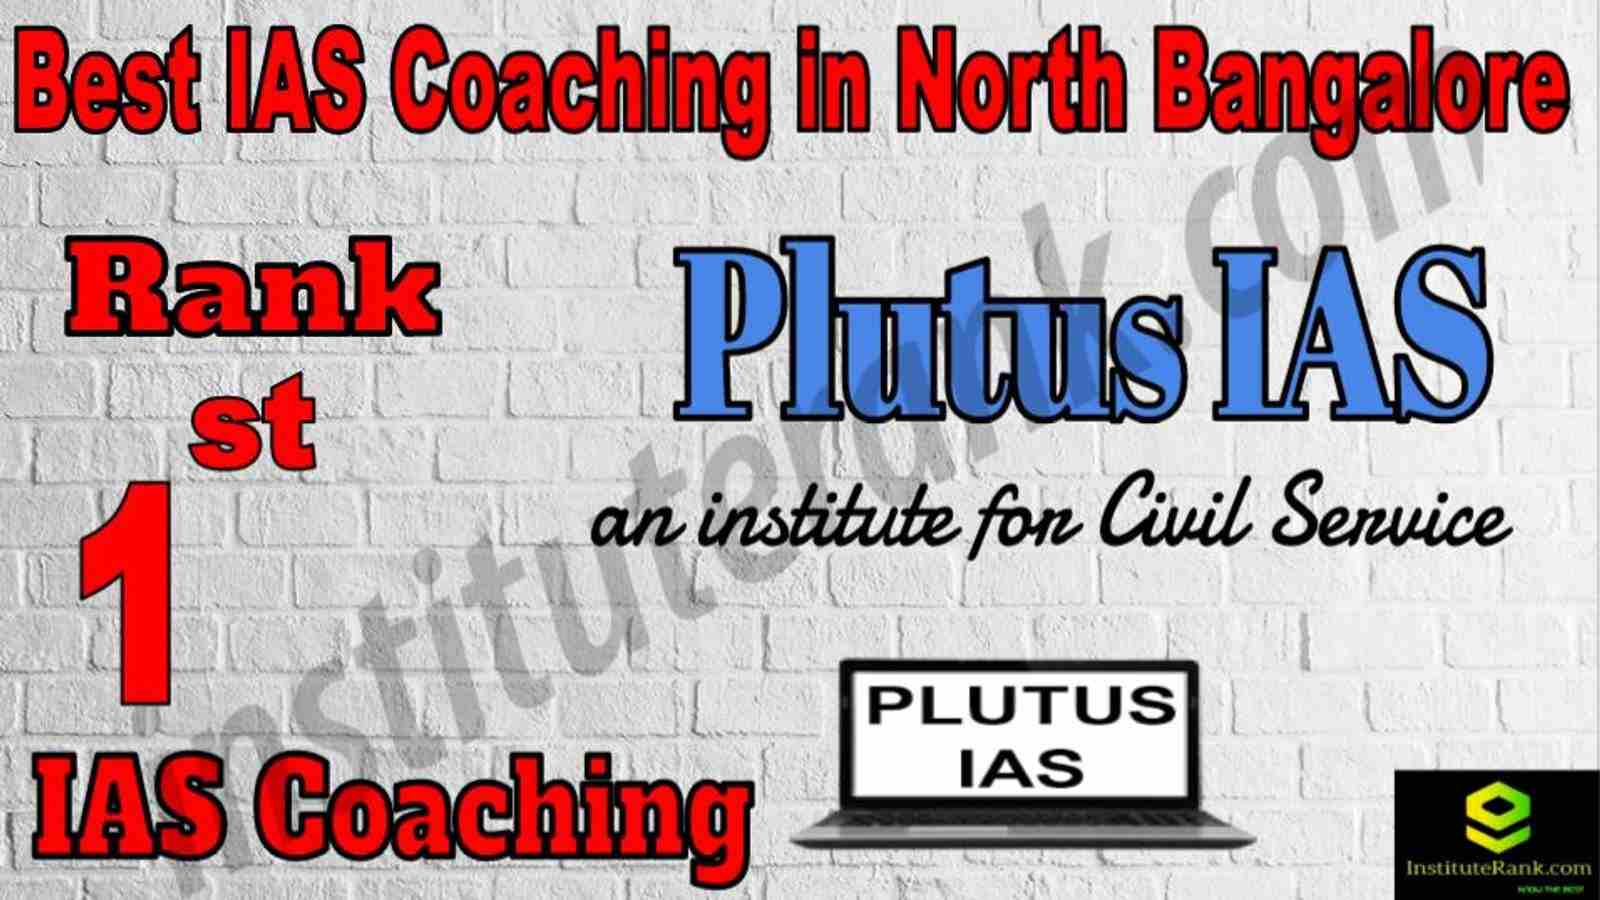 1st Best IAS Coaching in North Bangalore